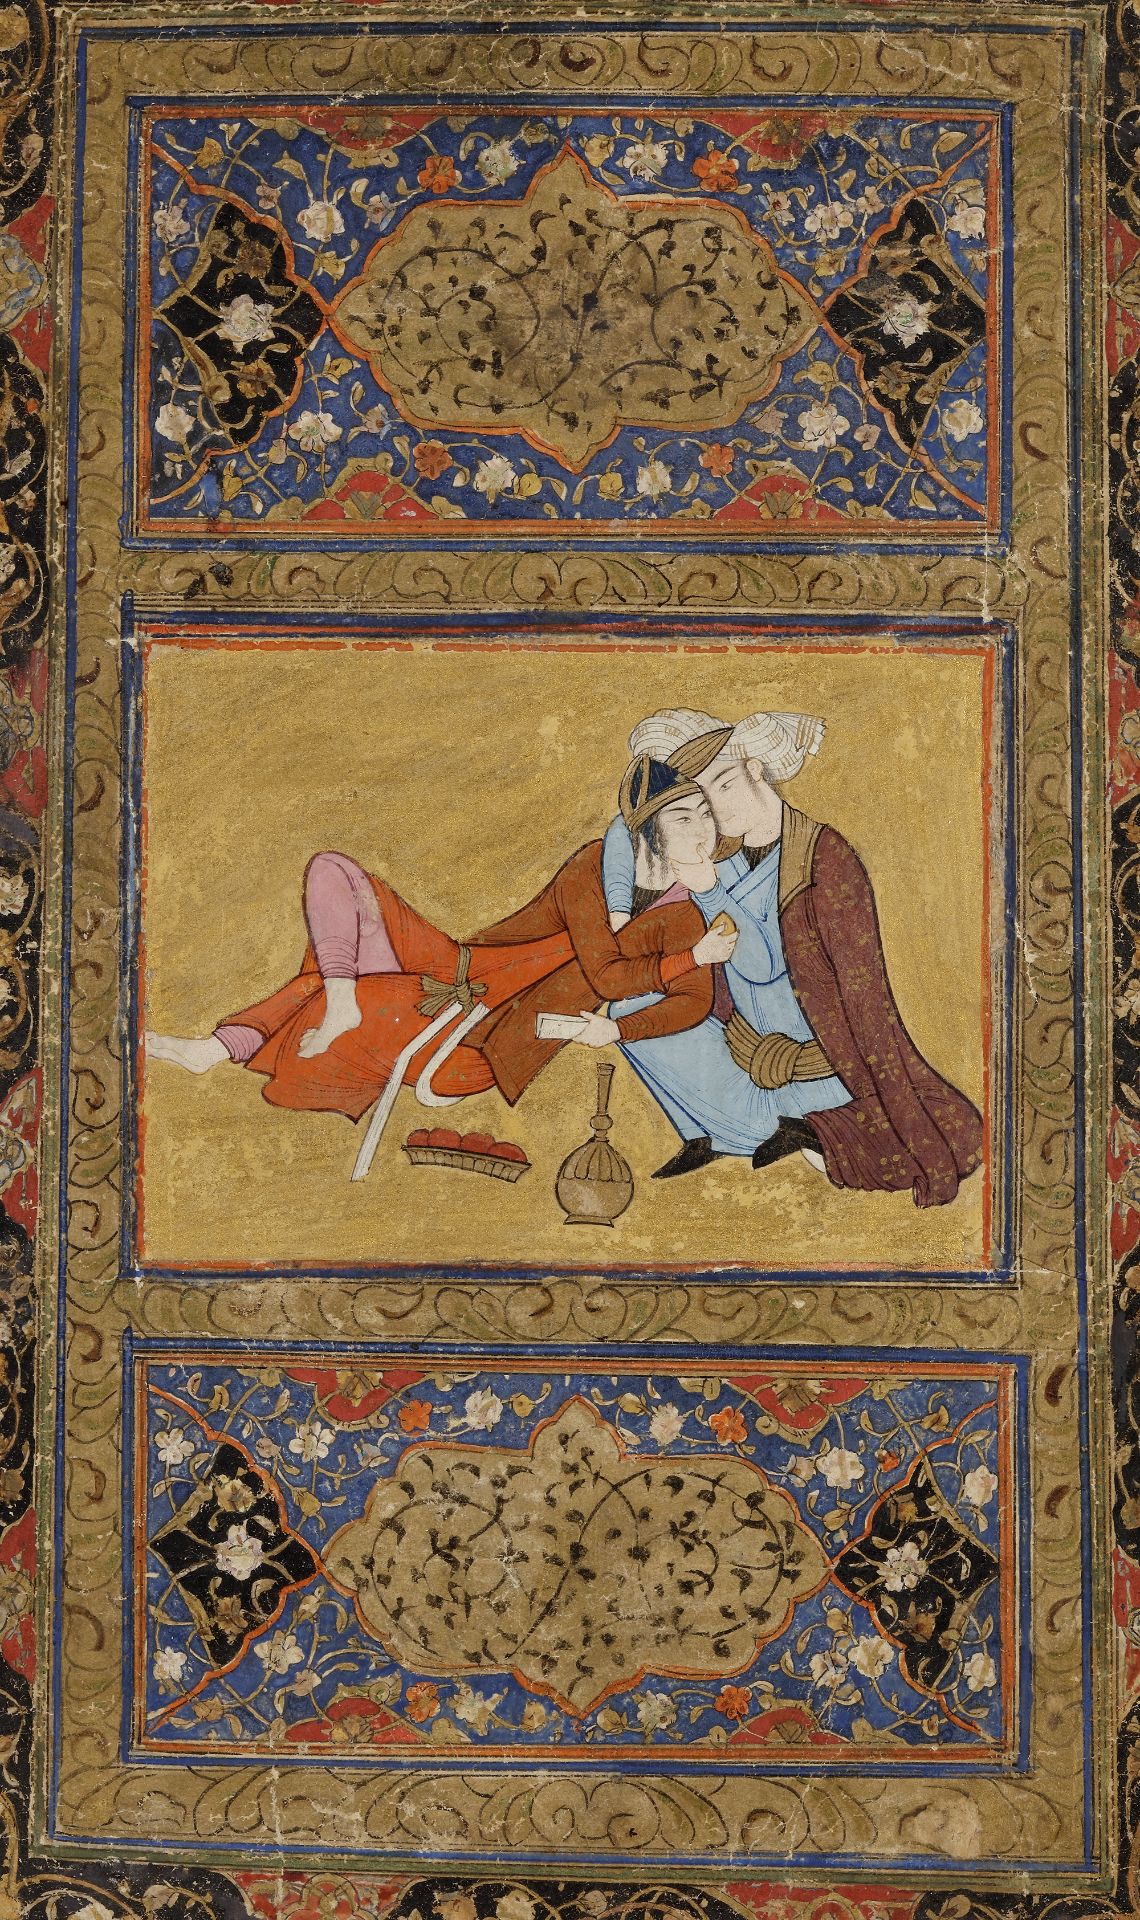 AN EMBRACING COUPLE, PERSIA, SAFAVID, 17TH CENTURY - Image 2 of 2